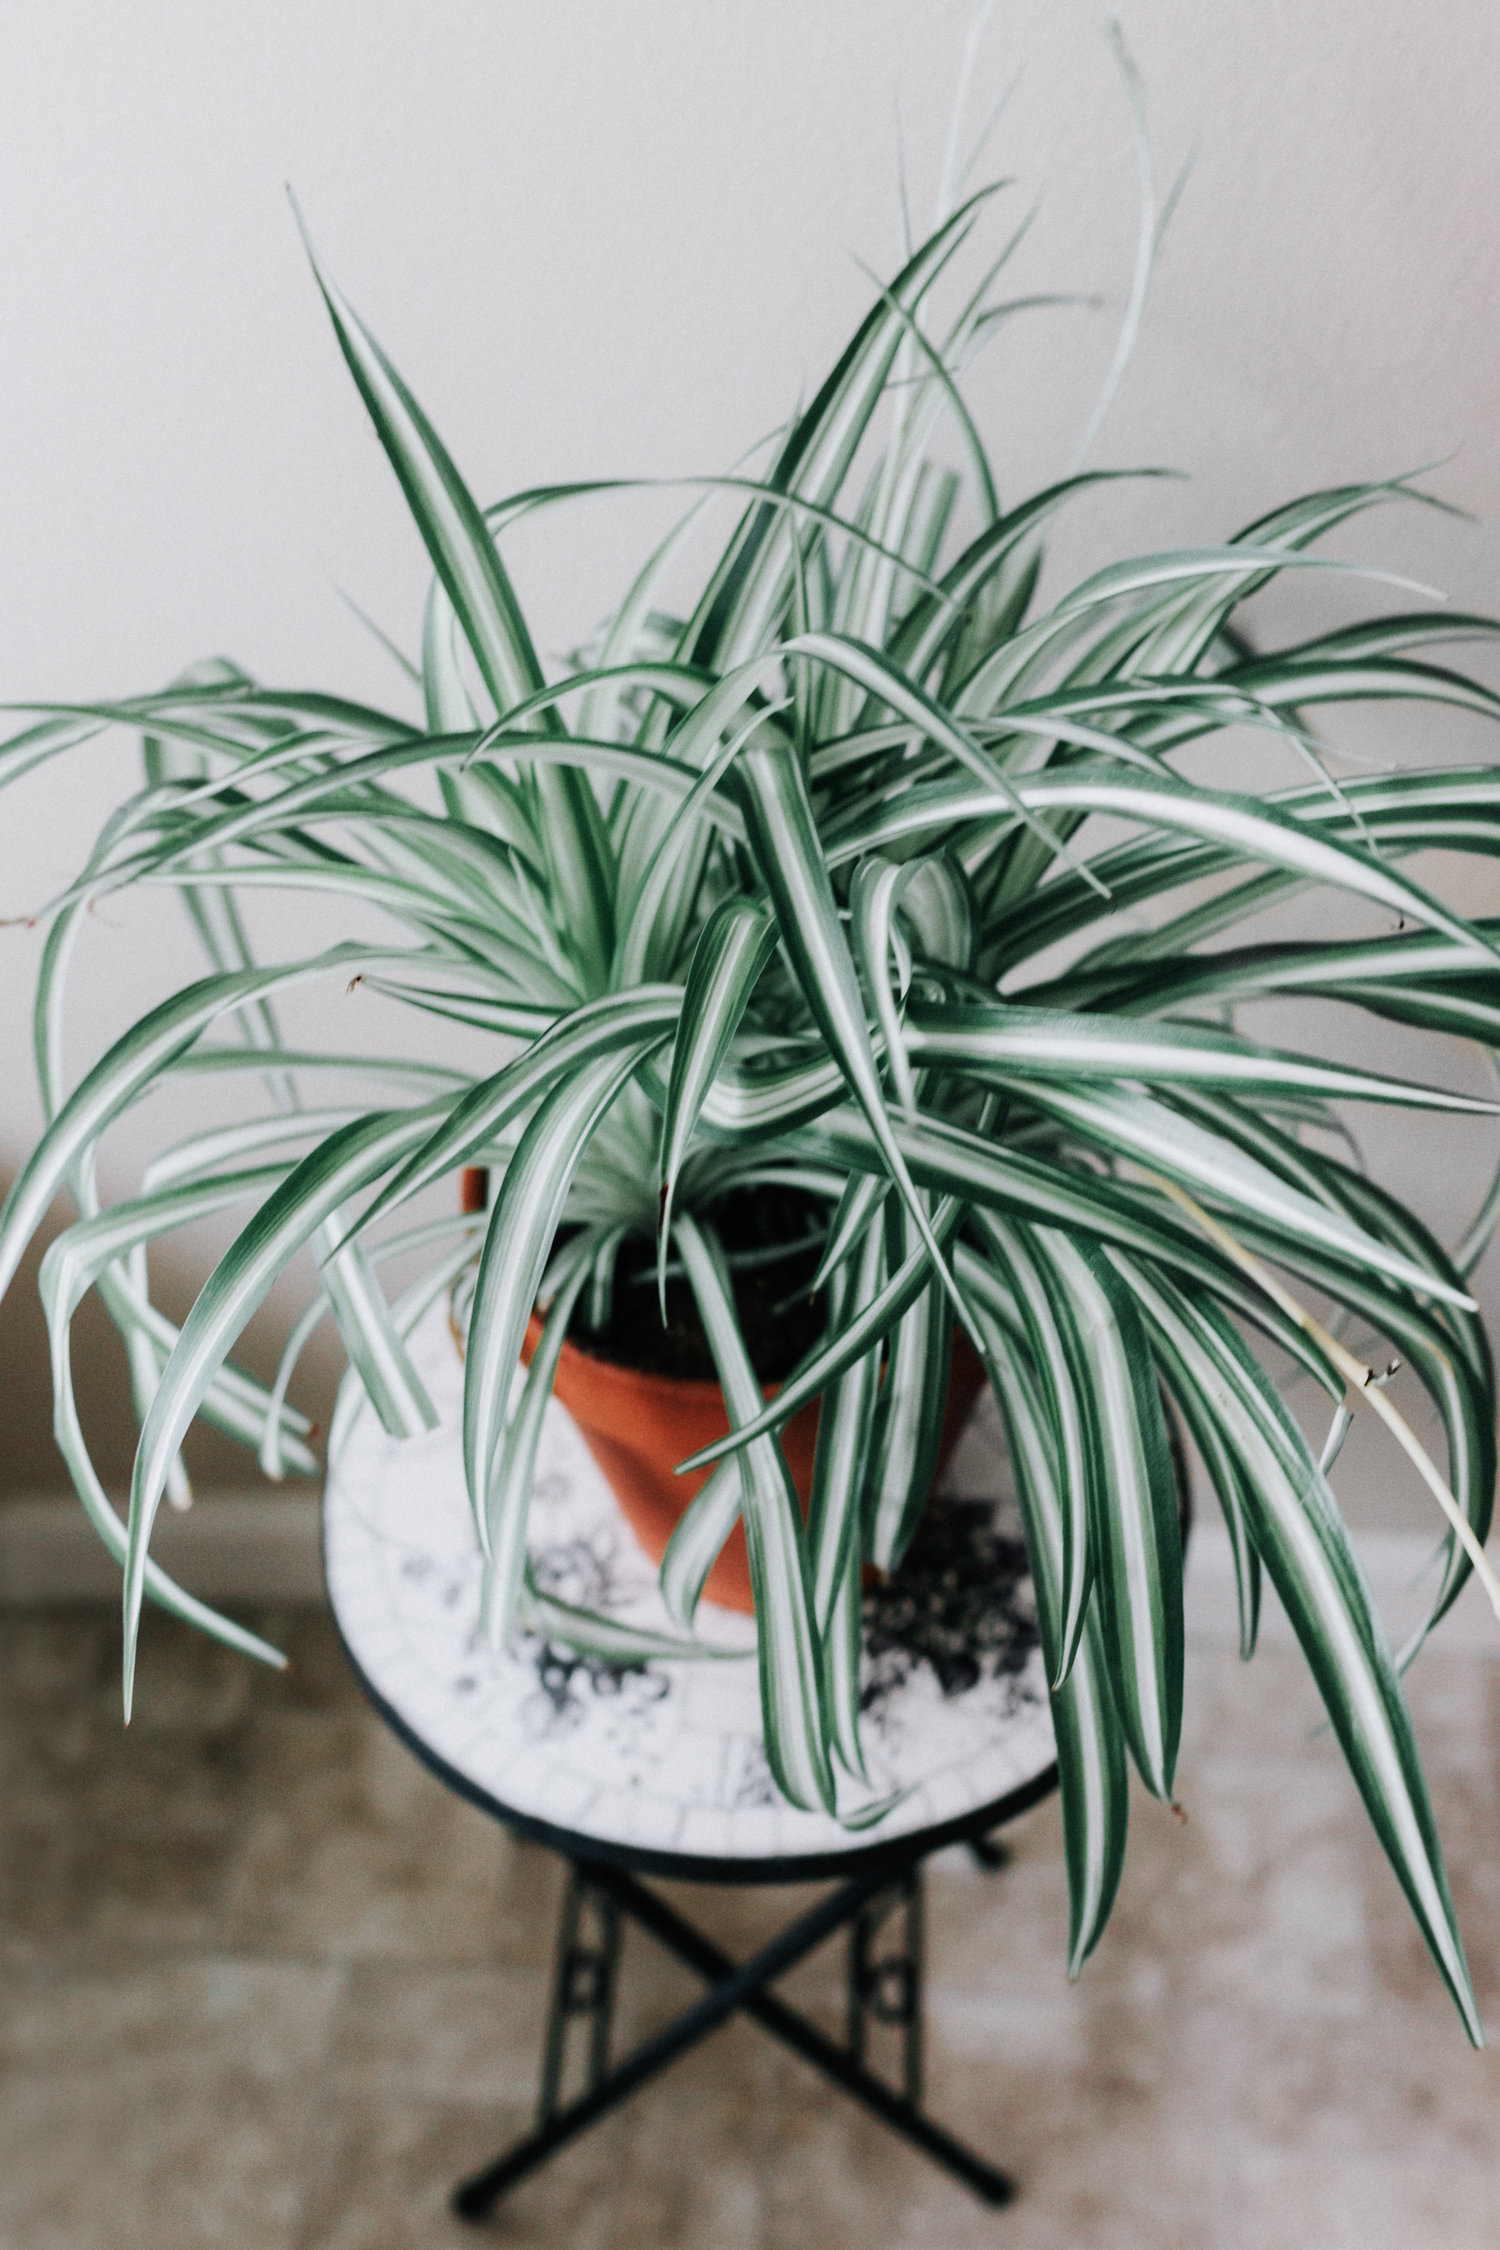 Spider Plant Chlorophytum Comosum Houseplant Academy Houseplant Courses And Education For The Indoor Plant Person,Best Dishwasher